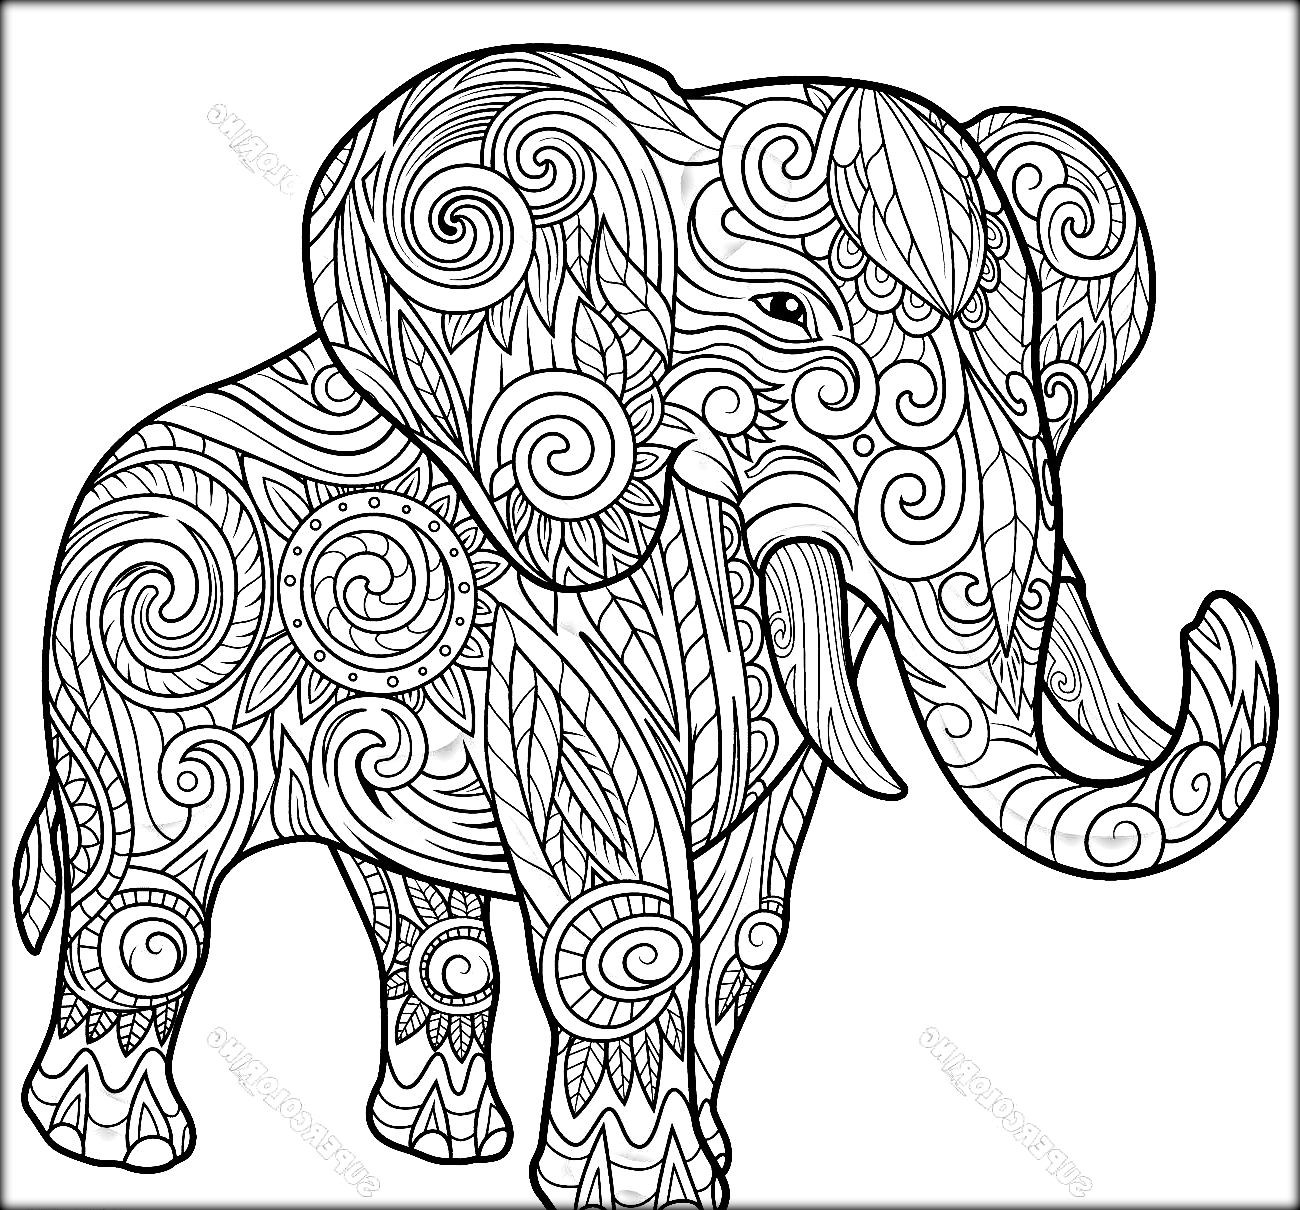 Adult Coloring Pages Elephant
 Elephant Coloring Pages coloringsuite